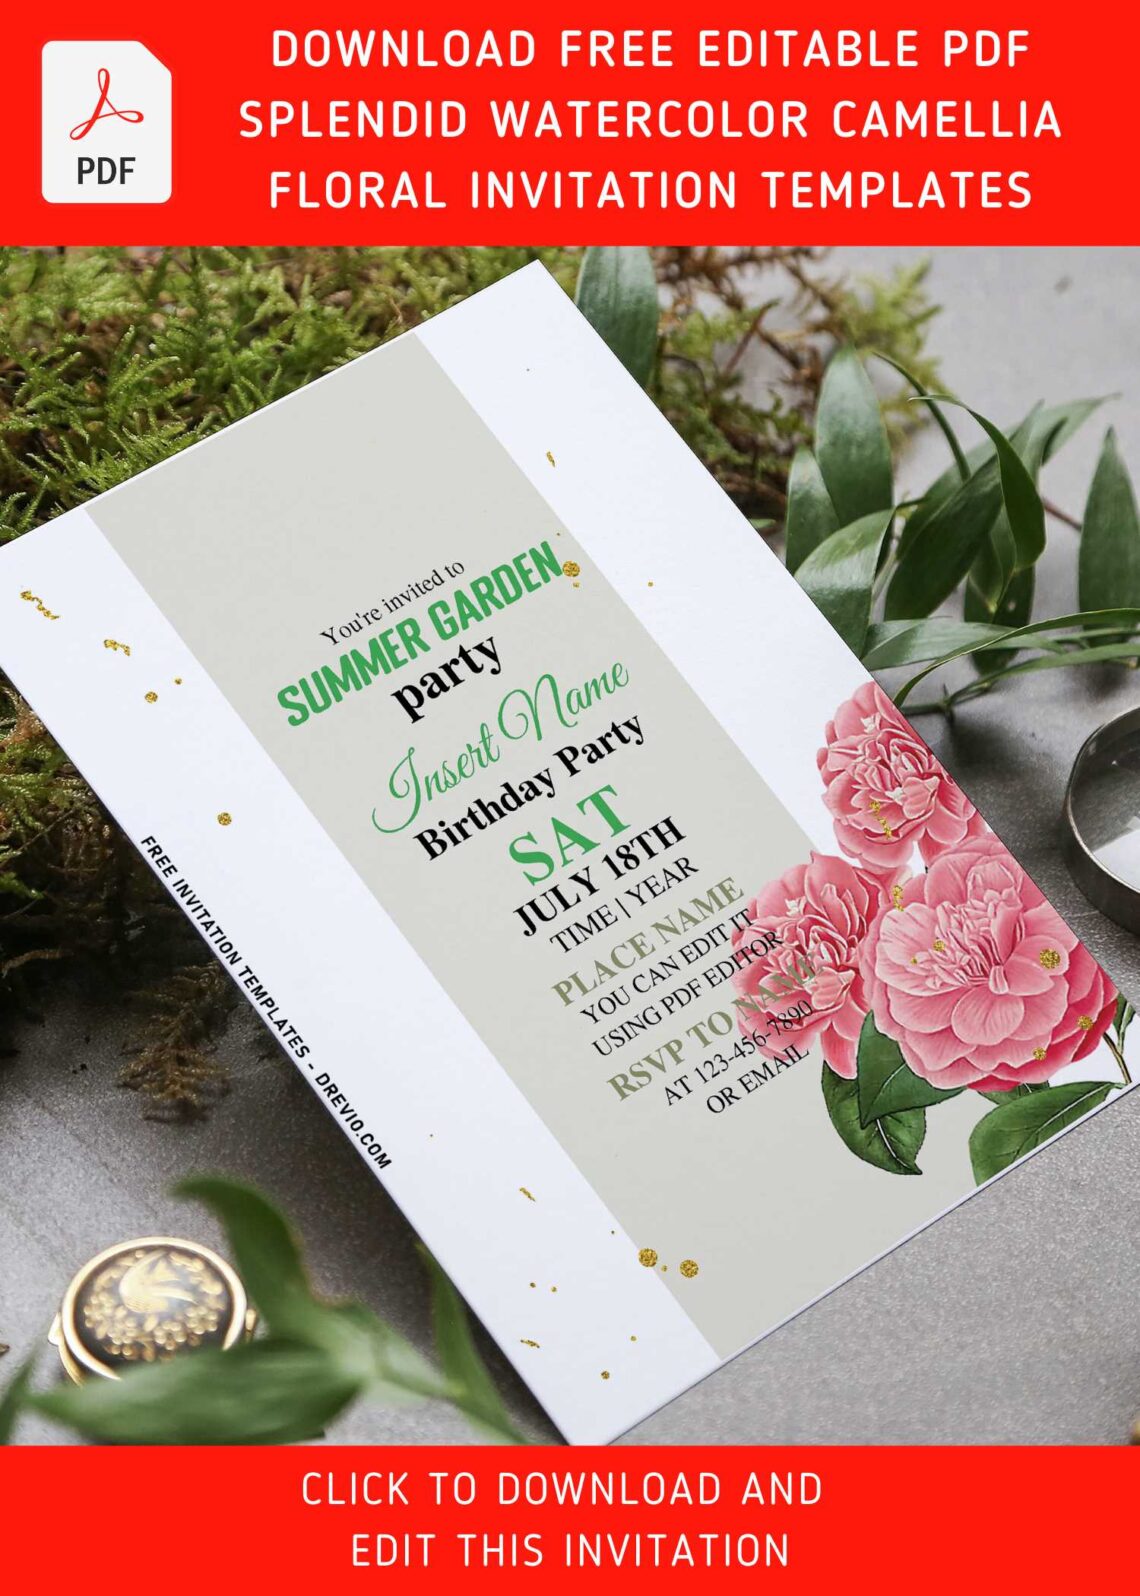 (Free Editable PDF) Fabulous Spring Watercolor Camellia Birthday Invitation Templates with modern floral decorations